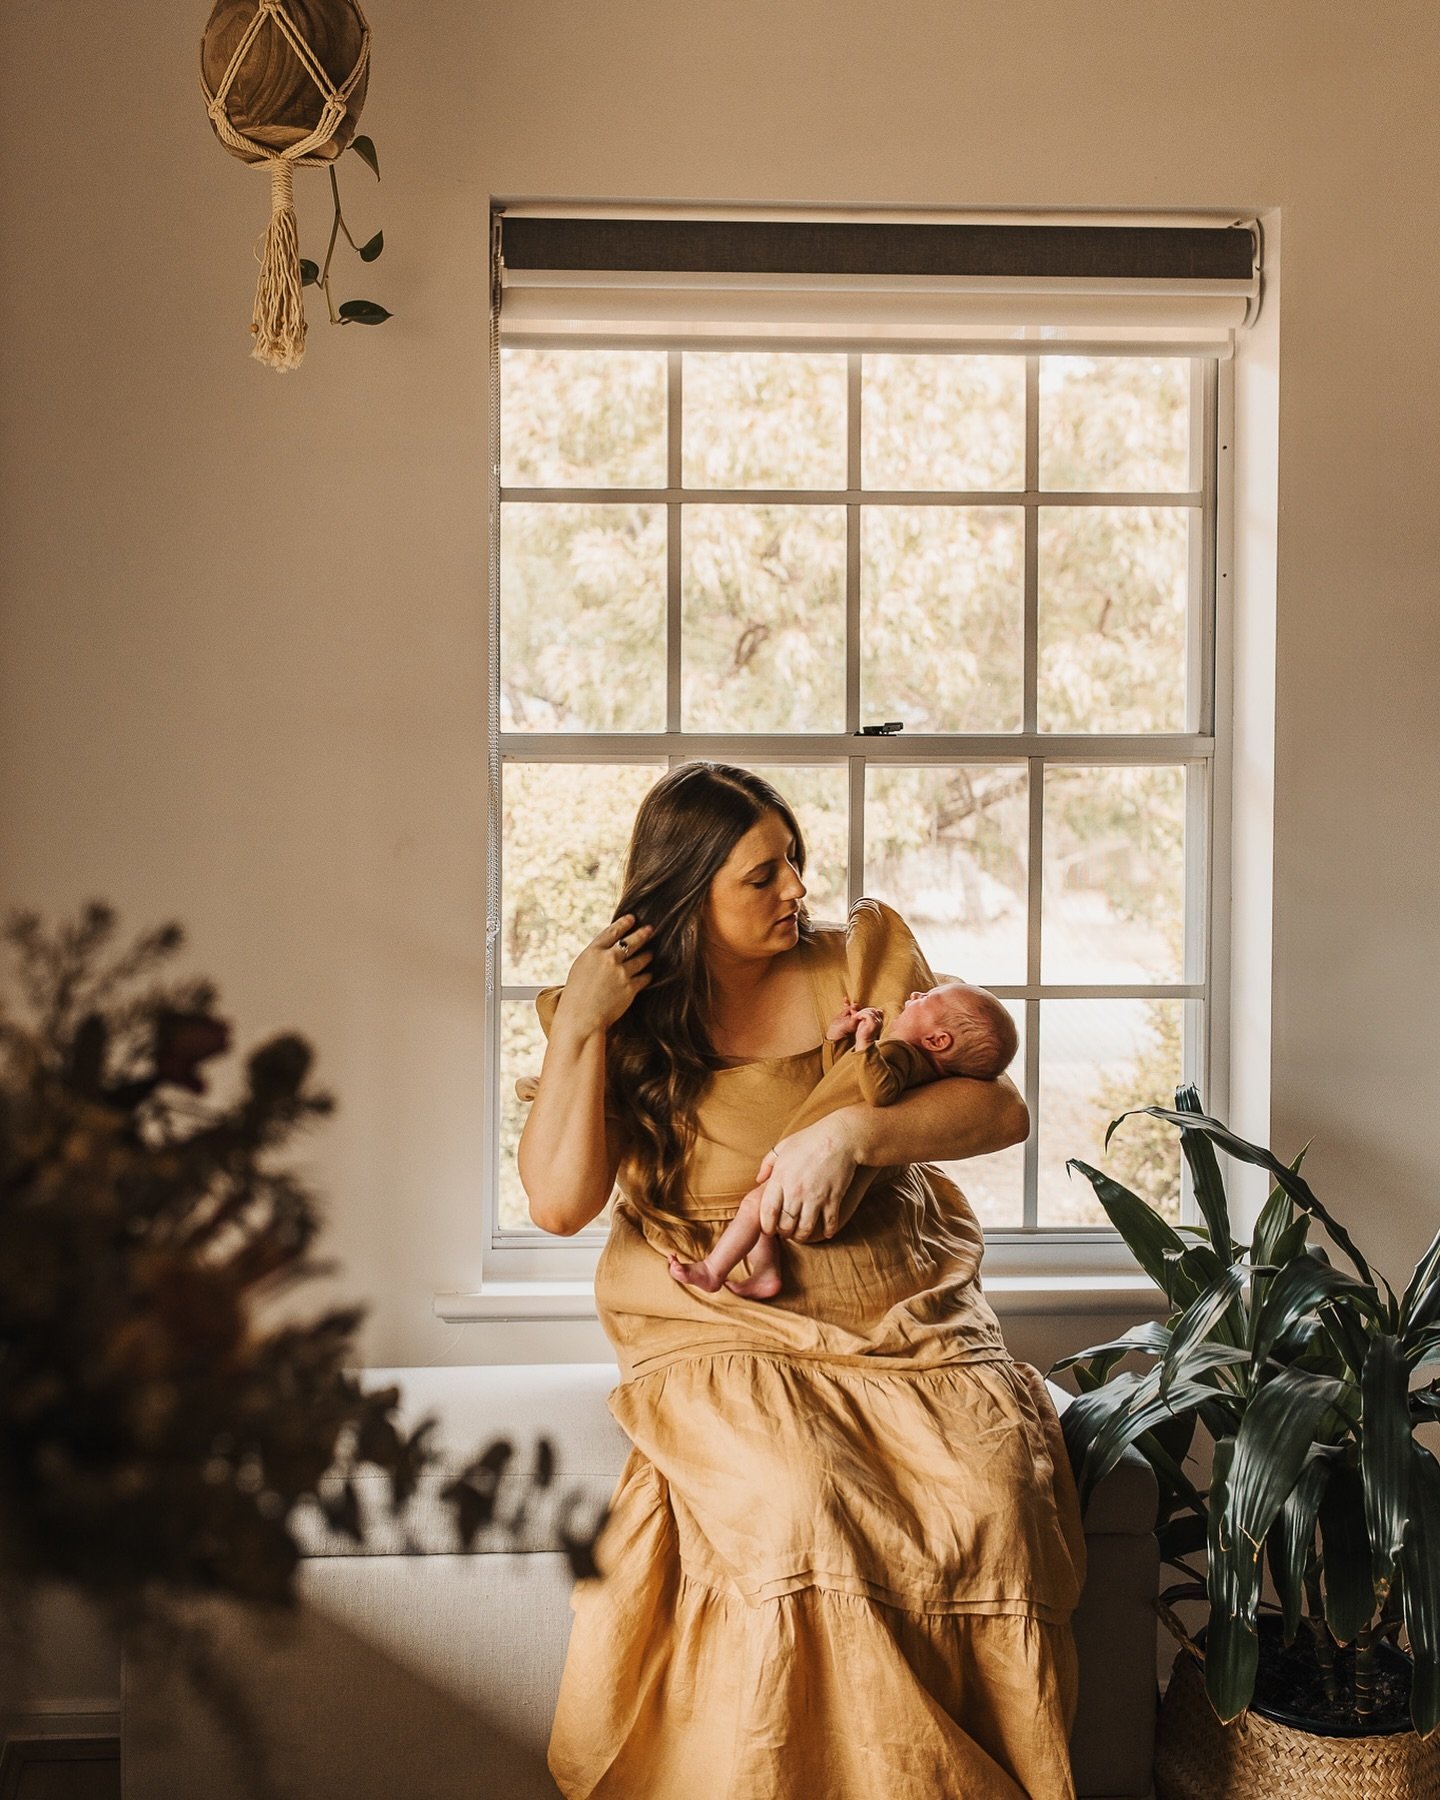 Enjoy each and every phase of motherhood. They all have their learnings and lessons to help you grow as a mum and as a person 🥰🥰😍😍

#nadinnegracephotography #inhomenewbornphotography #newbornlifestylephotography #clarevalleynewbornphotographer #y